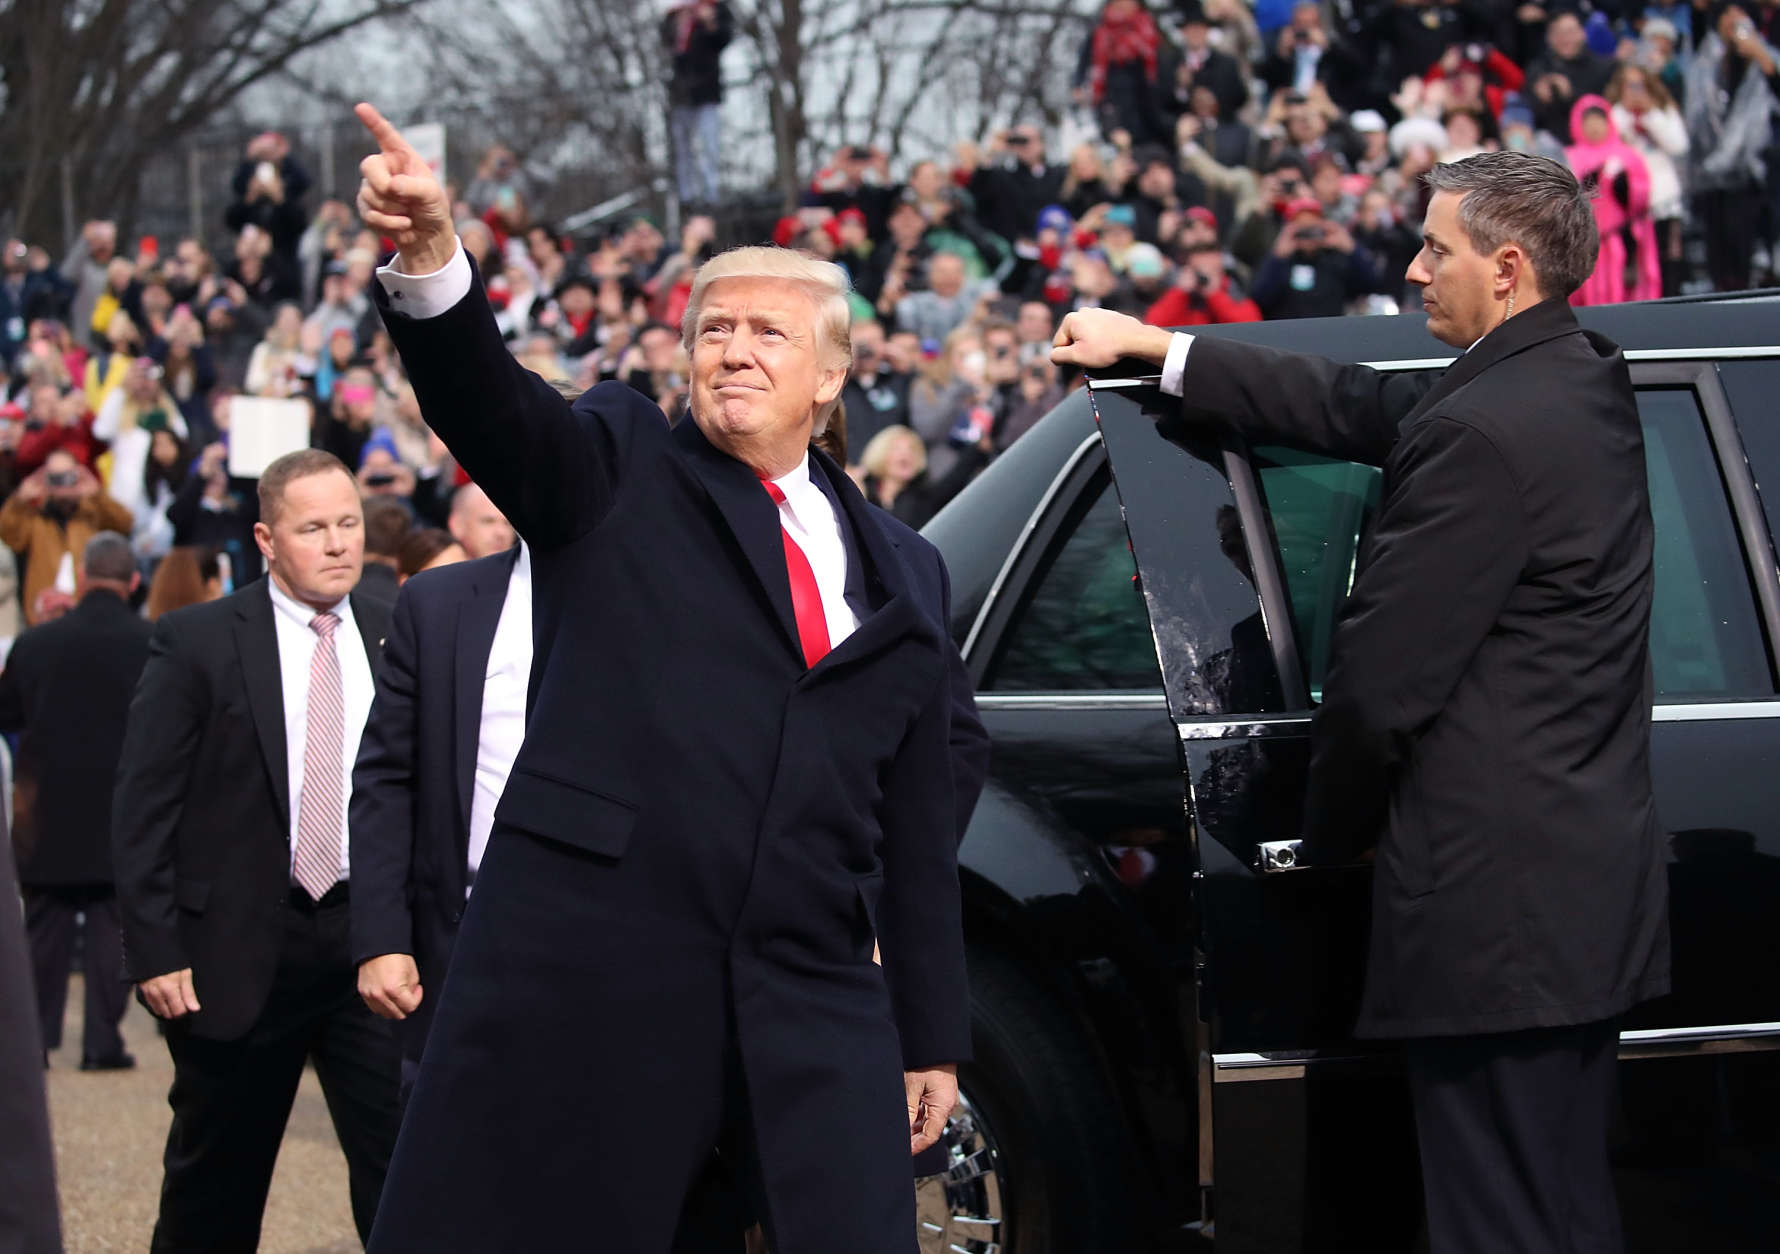 WASHINGTON, DC - JANUARY 20: U.S. President Donald Trump gestures after getting out of his car in front of the White House on January 20, 2017 in Washington, DC. President Trump was sworn in as the nation's 45th president during an inaugural ceremony at the U.S. Capitol, on January 20, 2017 in Washington, DC.  (Photo by Mark Wilson/Getty Images)